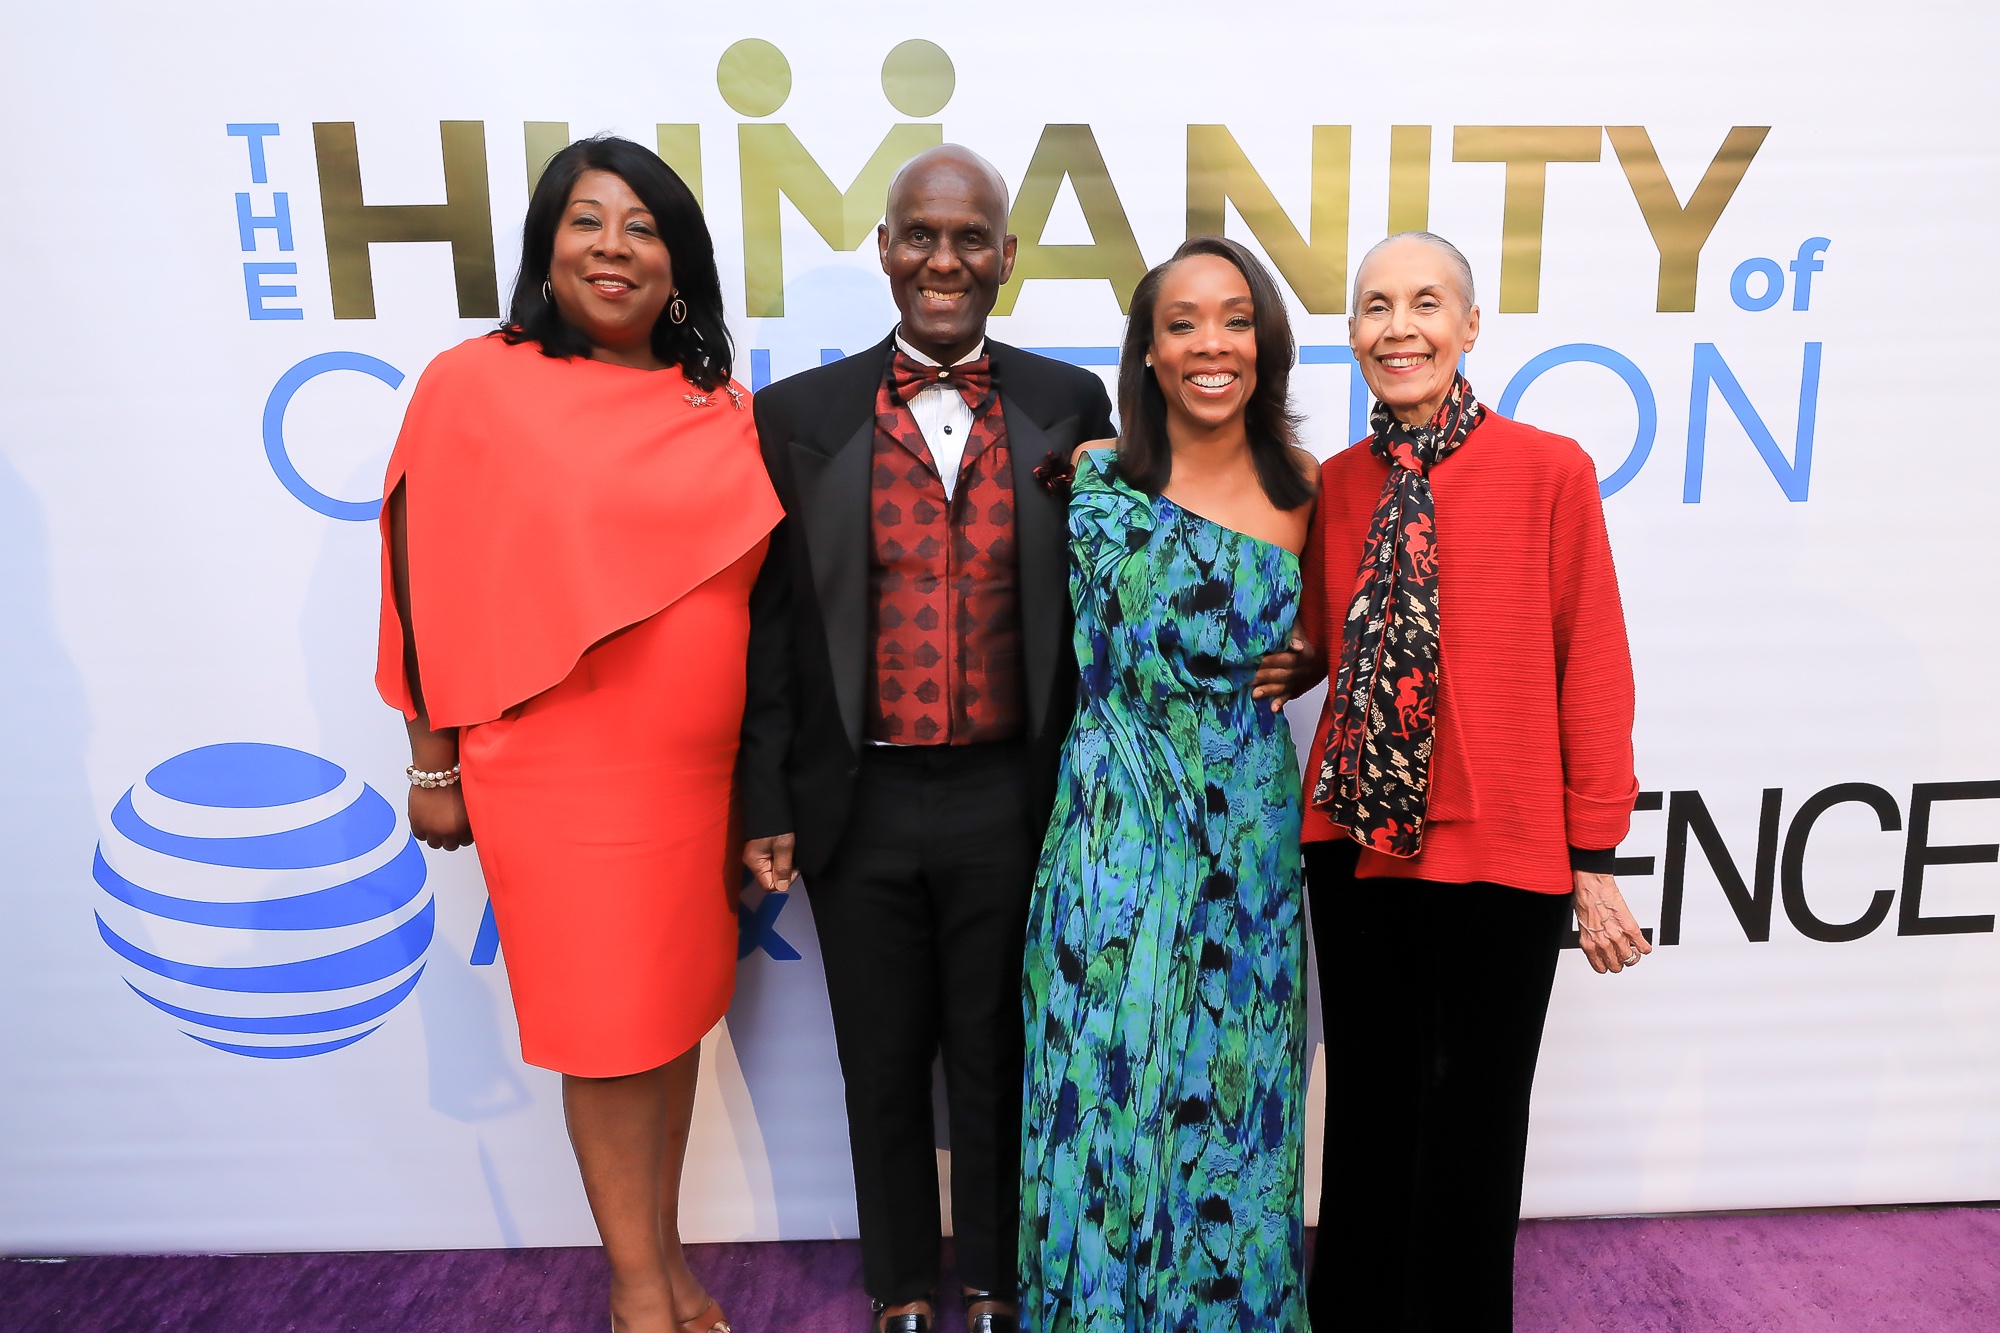 At&T's Humanity of Connection awards